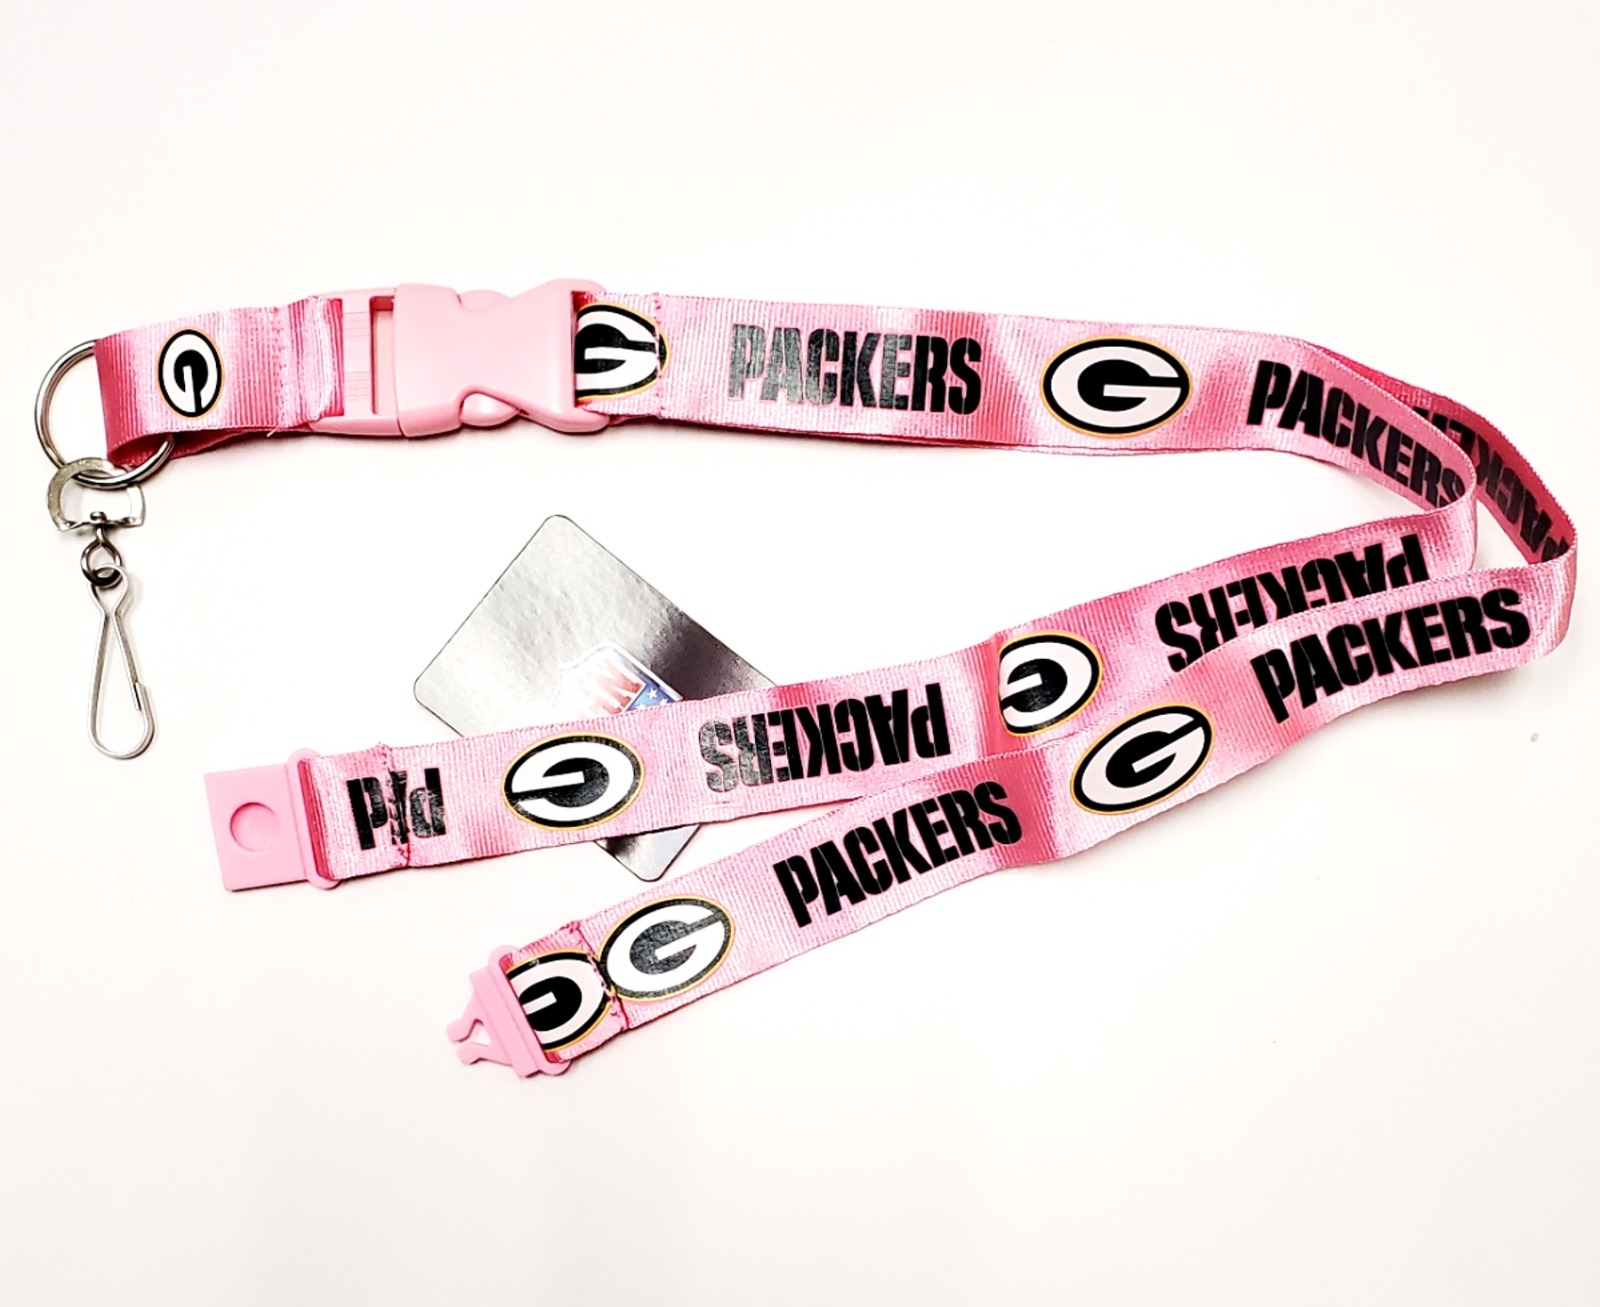 Download Psg Inc Green Bay Packers Pink Design Premium Lanyard 2 Sided Breakaway Clip Keychain Football Sports Outdoors Office Products Florent Dejardin Fr